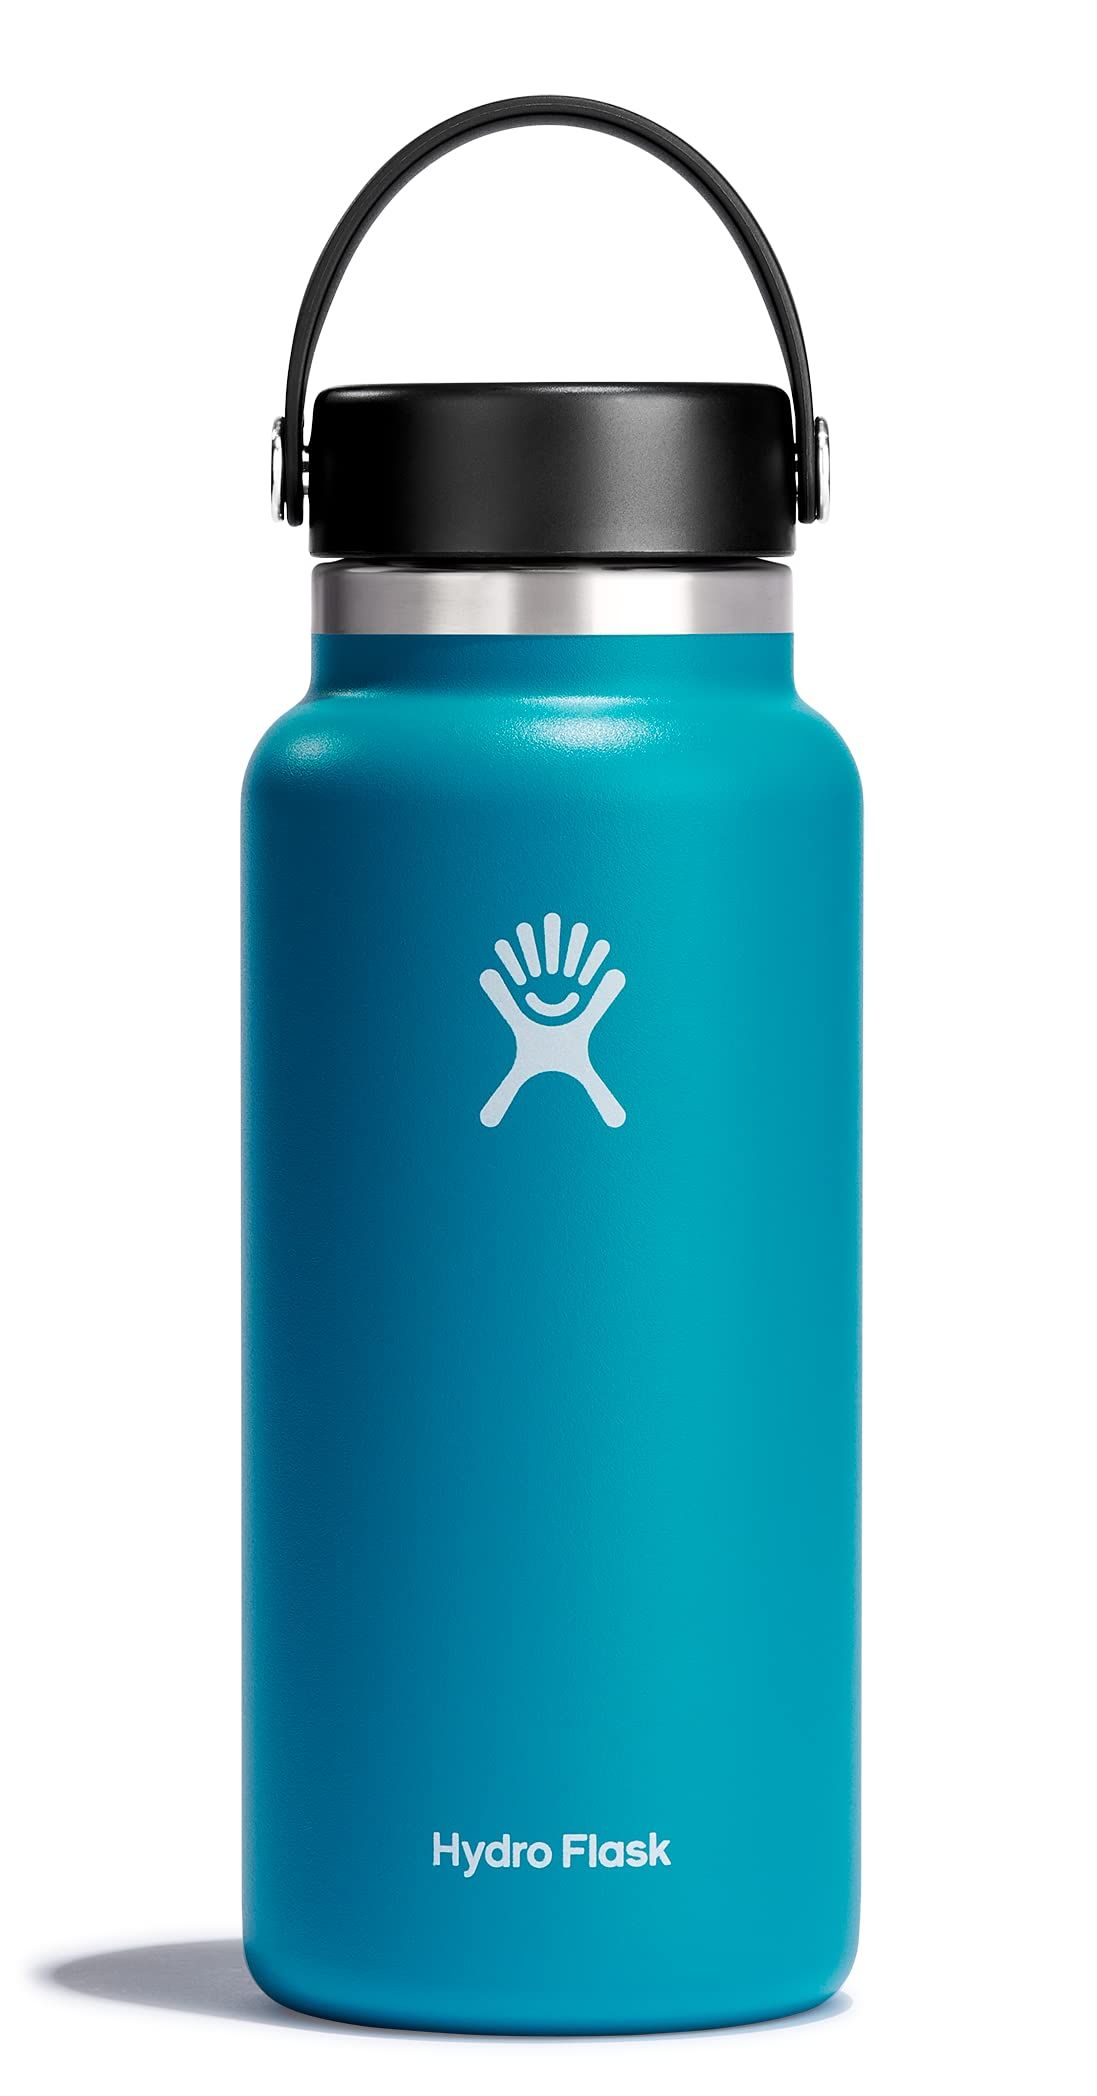 Hydro Flasks Are Still On Sale for Prime Day